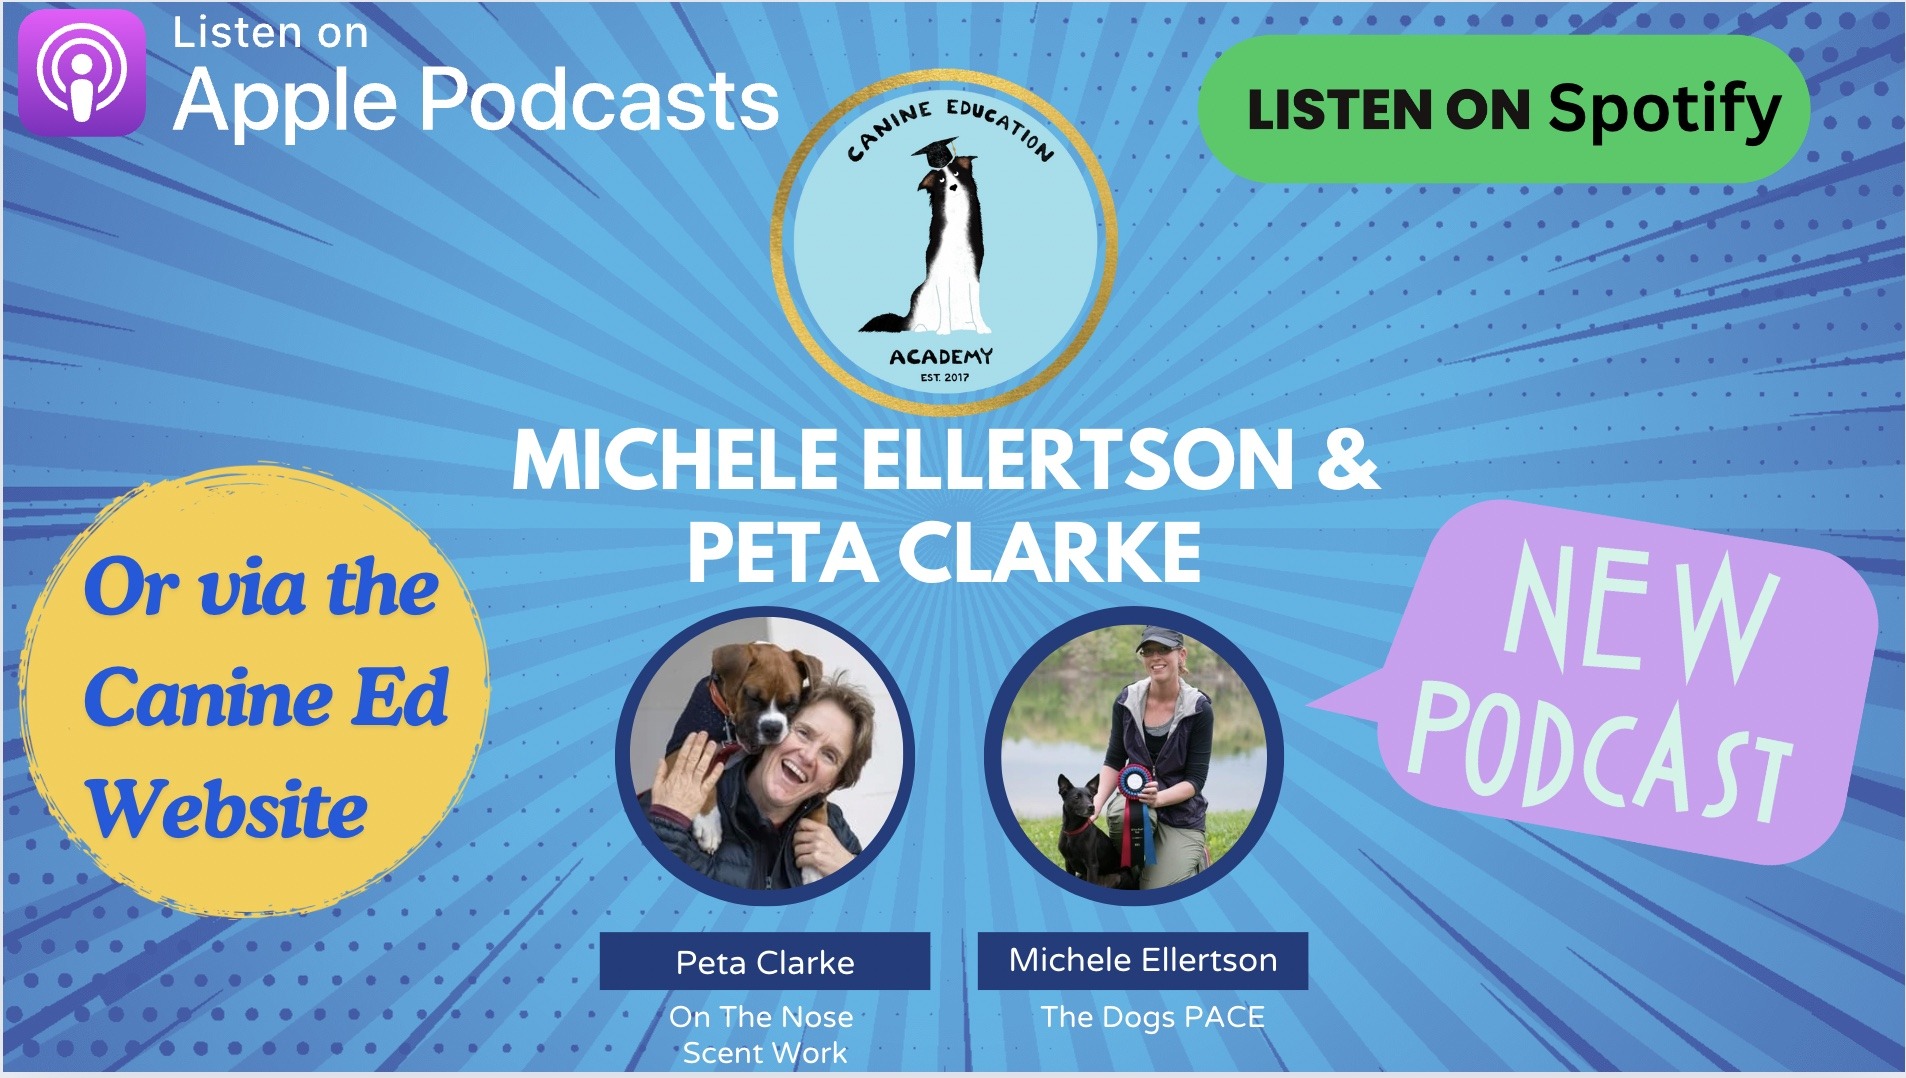 Michele Ellertson and Peta Clarke Chat Including Michele's Aussie Visit This August